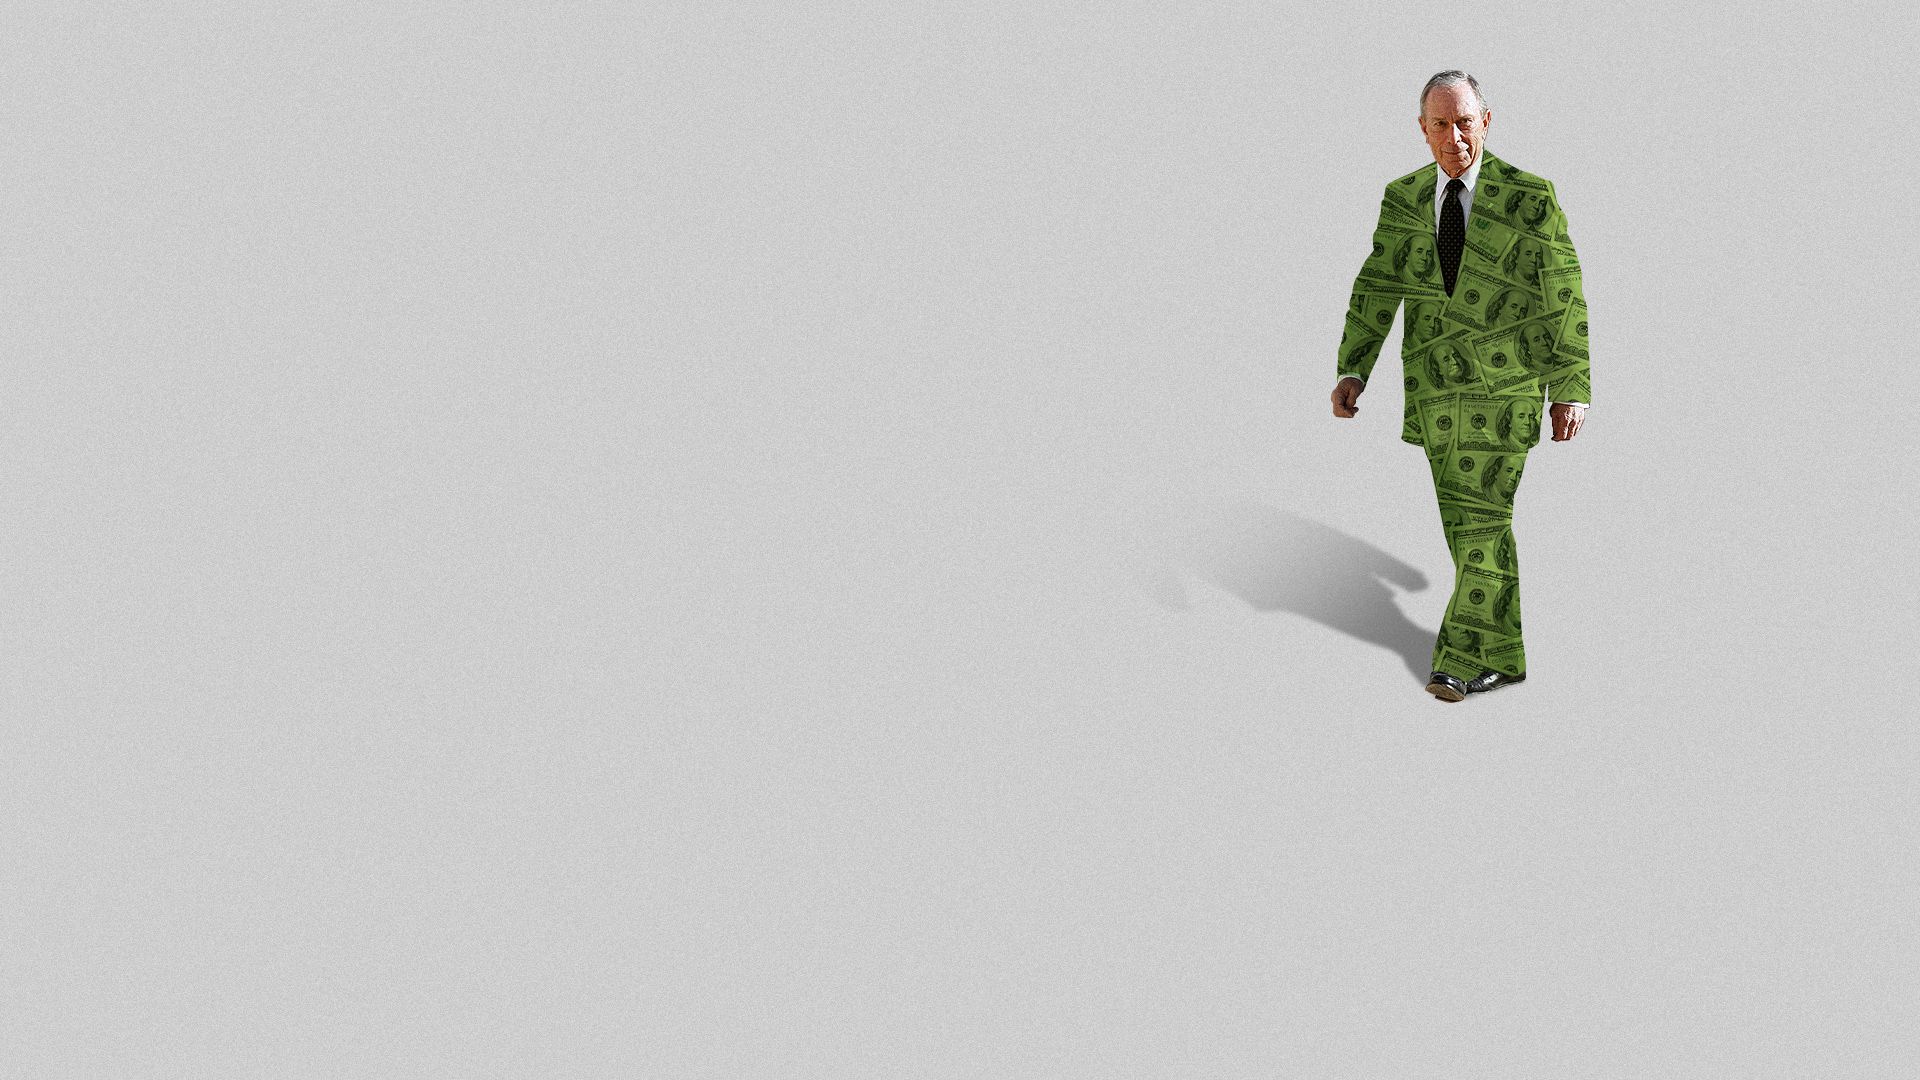 Illustration of Michael Bloomberg in a suit made of dollar bills